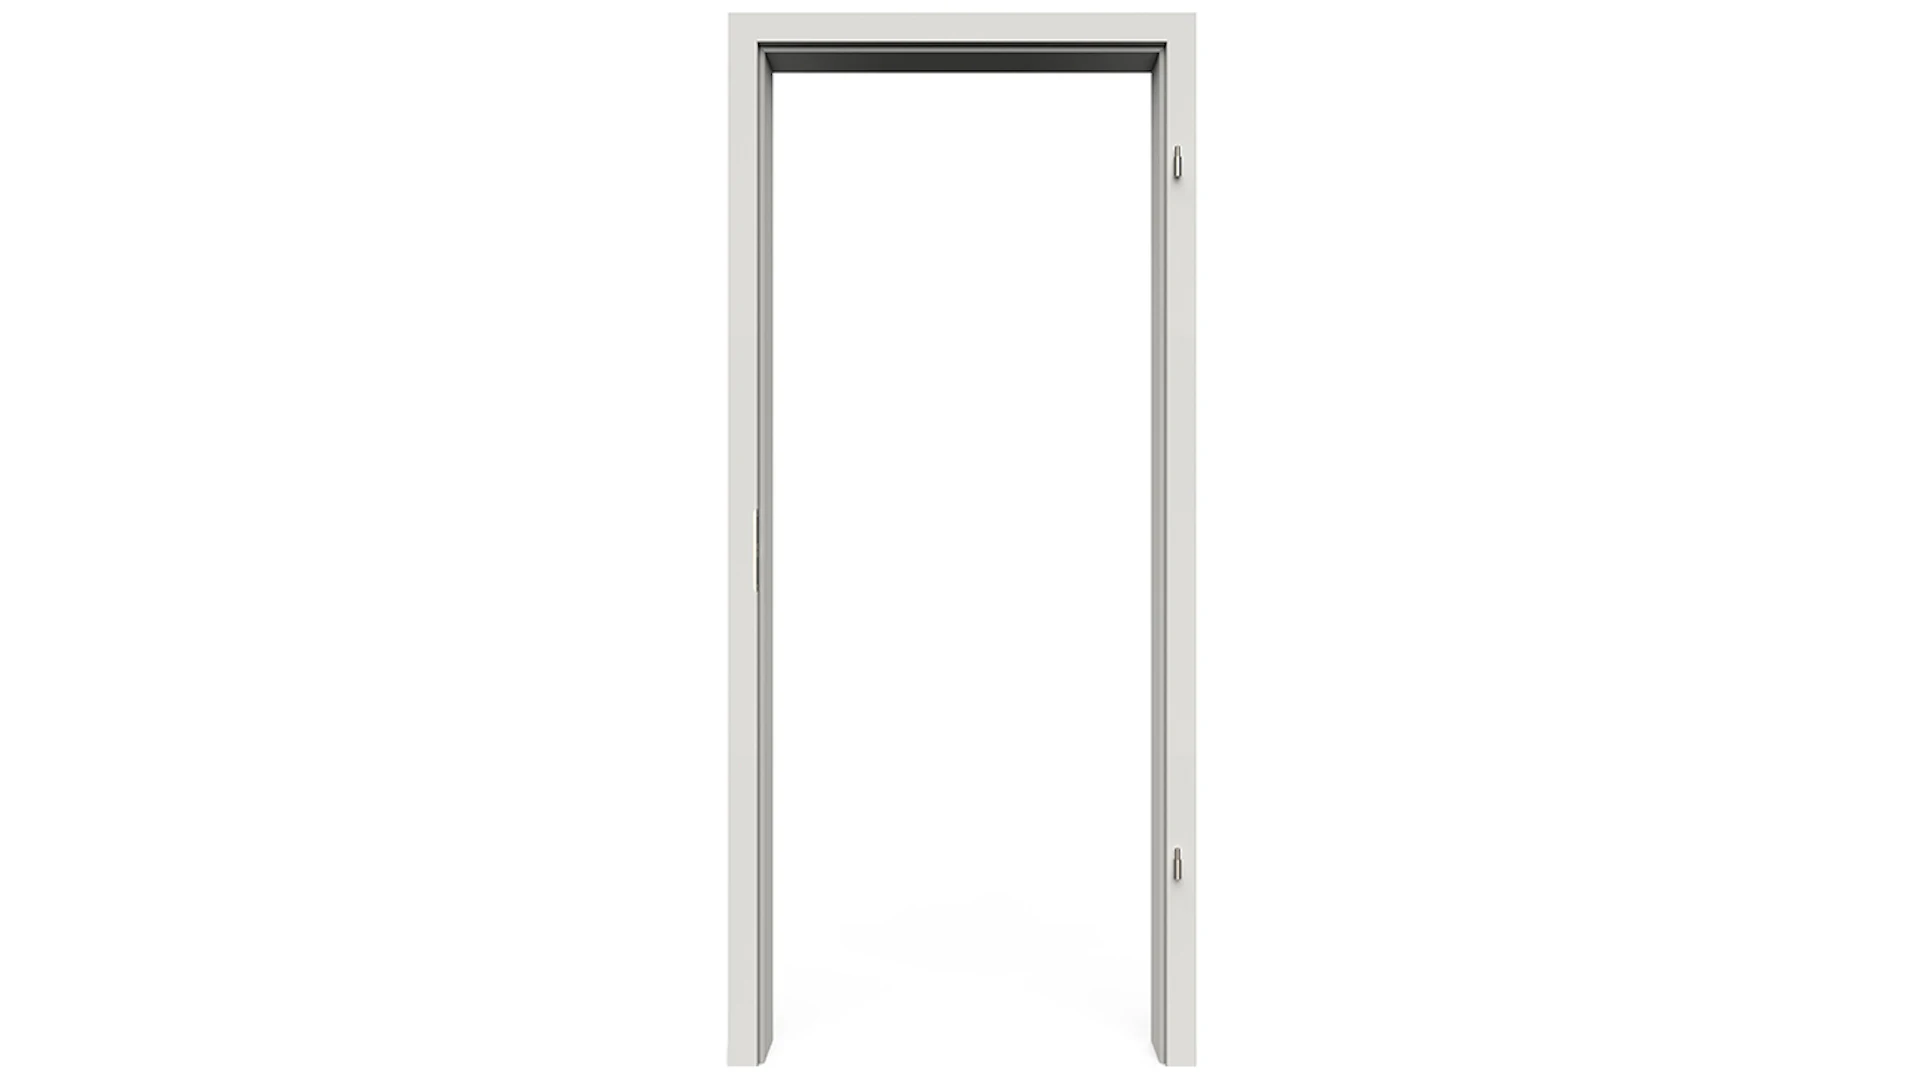 planeo standard frame round edge - CPL pearl white - 2110mm